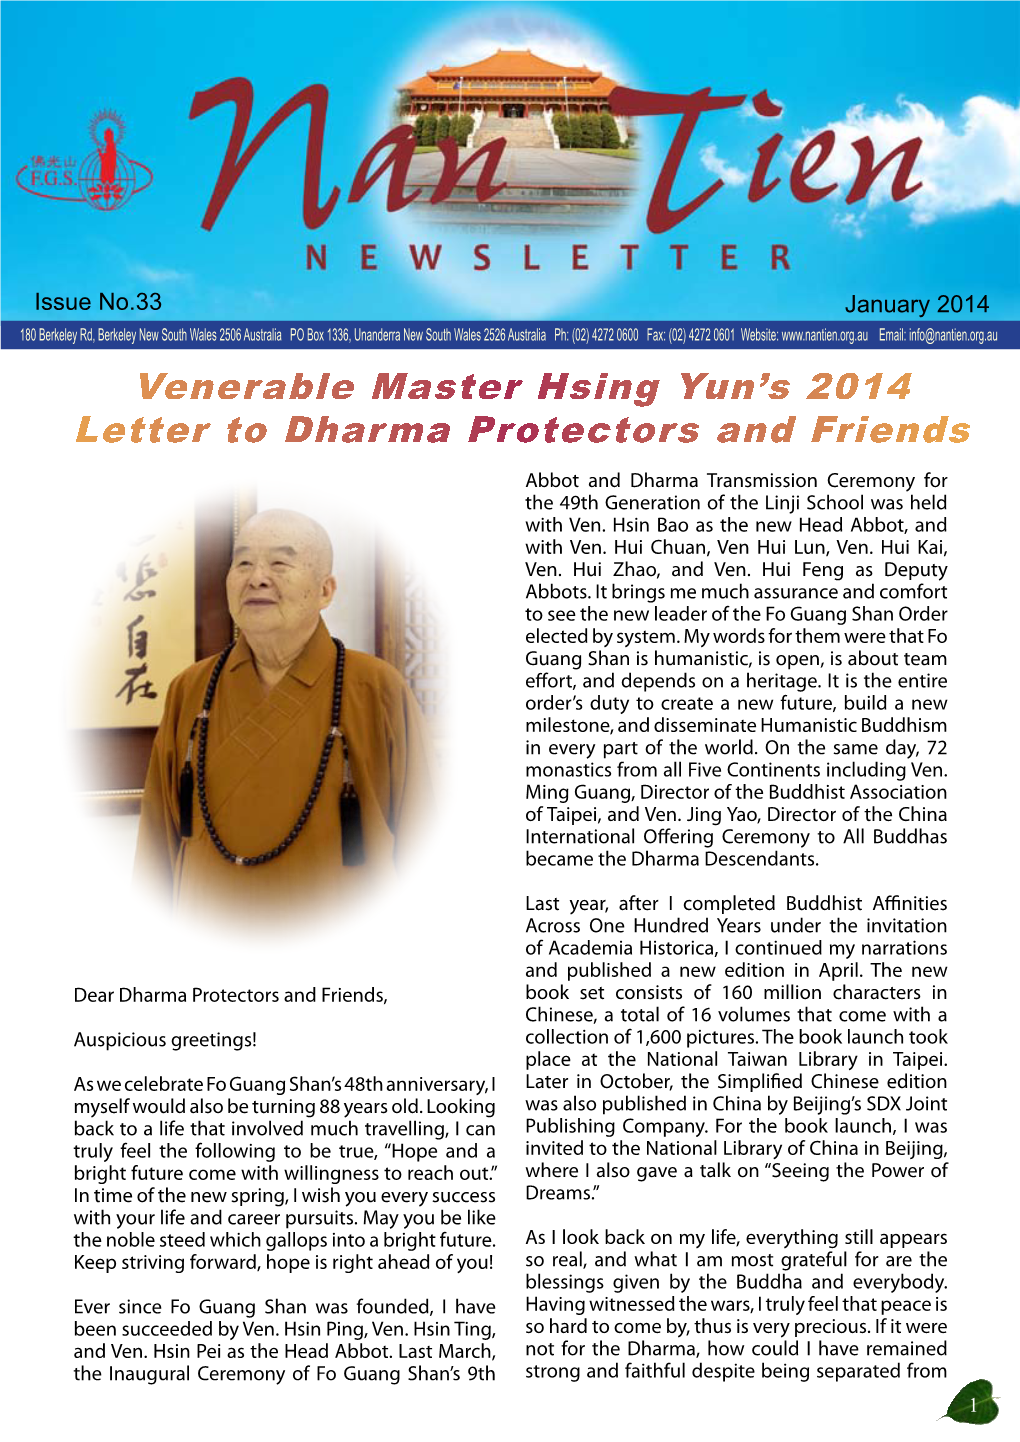 Venerable Master Hsing Yun's 2014 Letter to Dharma Protectors And